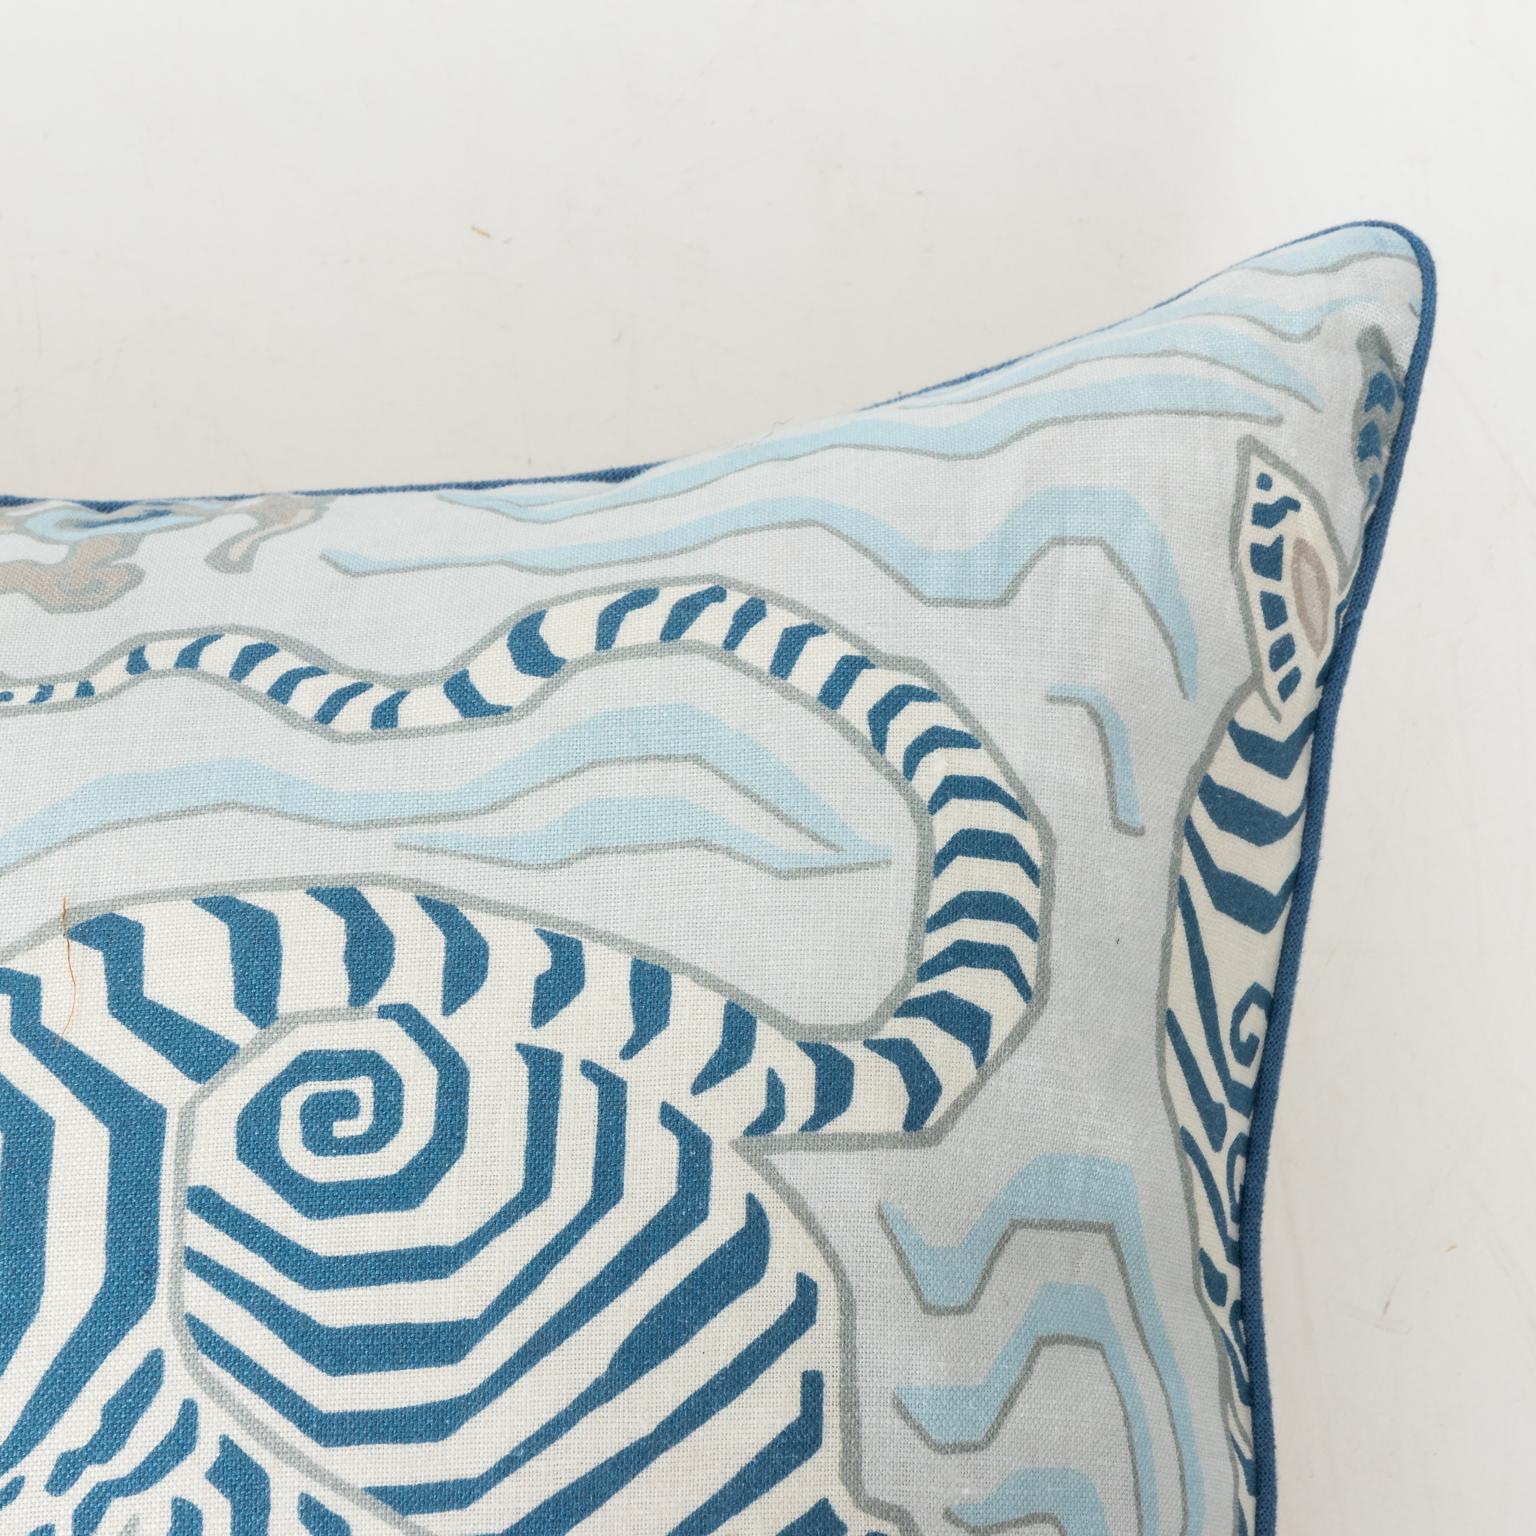 20th Century Blue and White Dragon Pillow